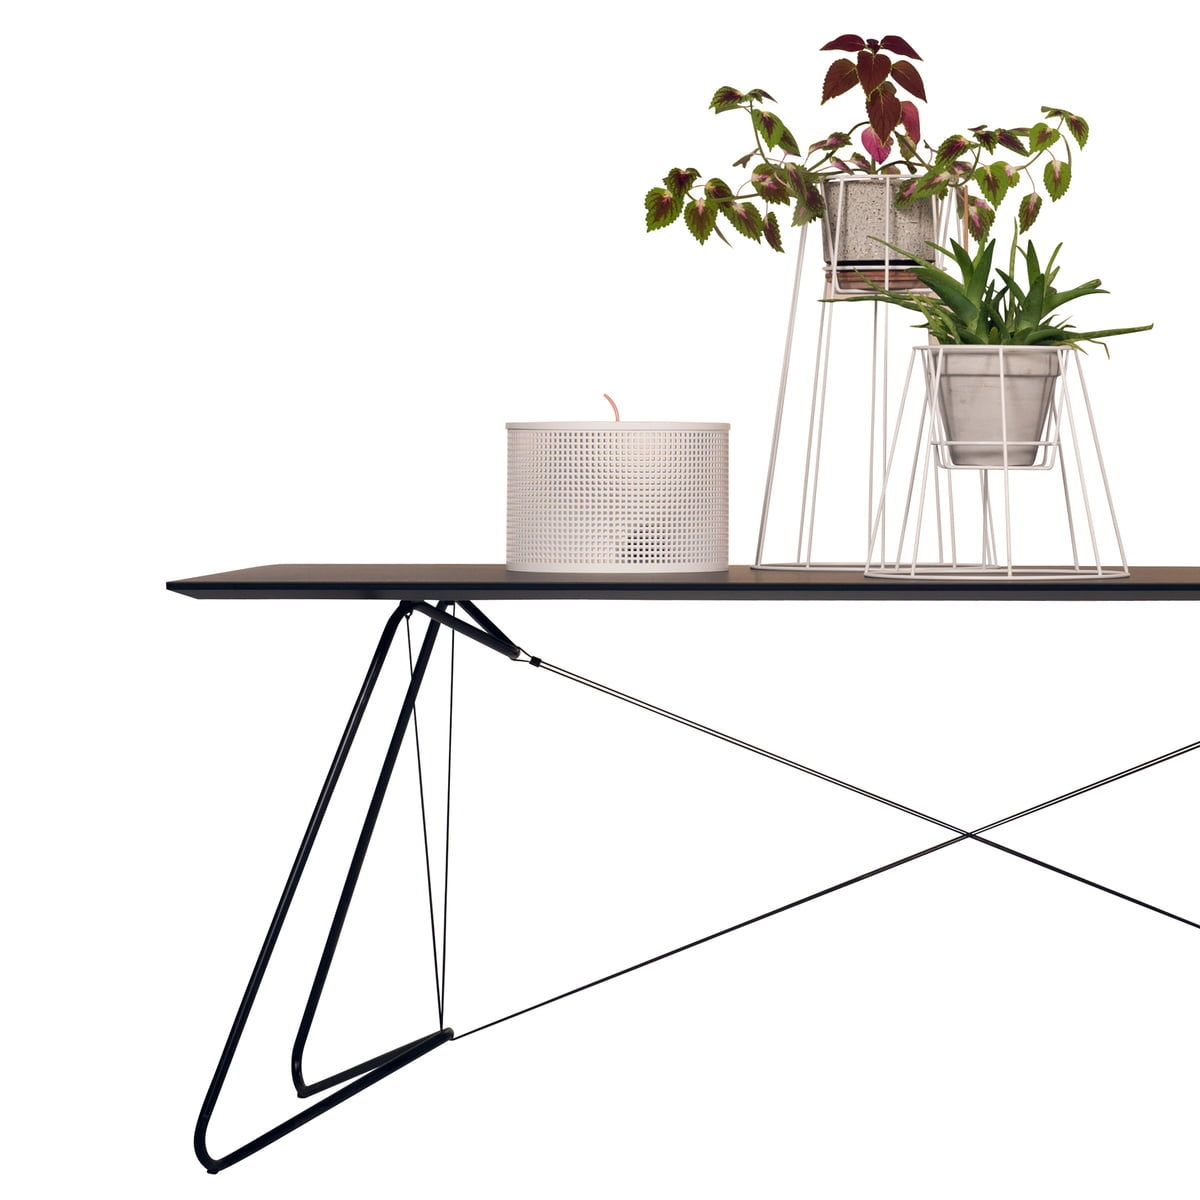 The Cibele Flowerpot Stand by Design